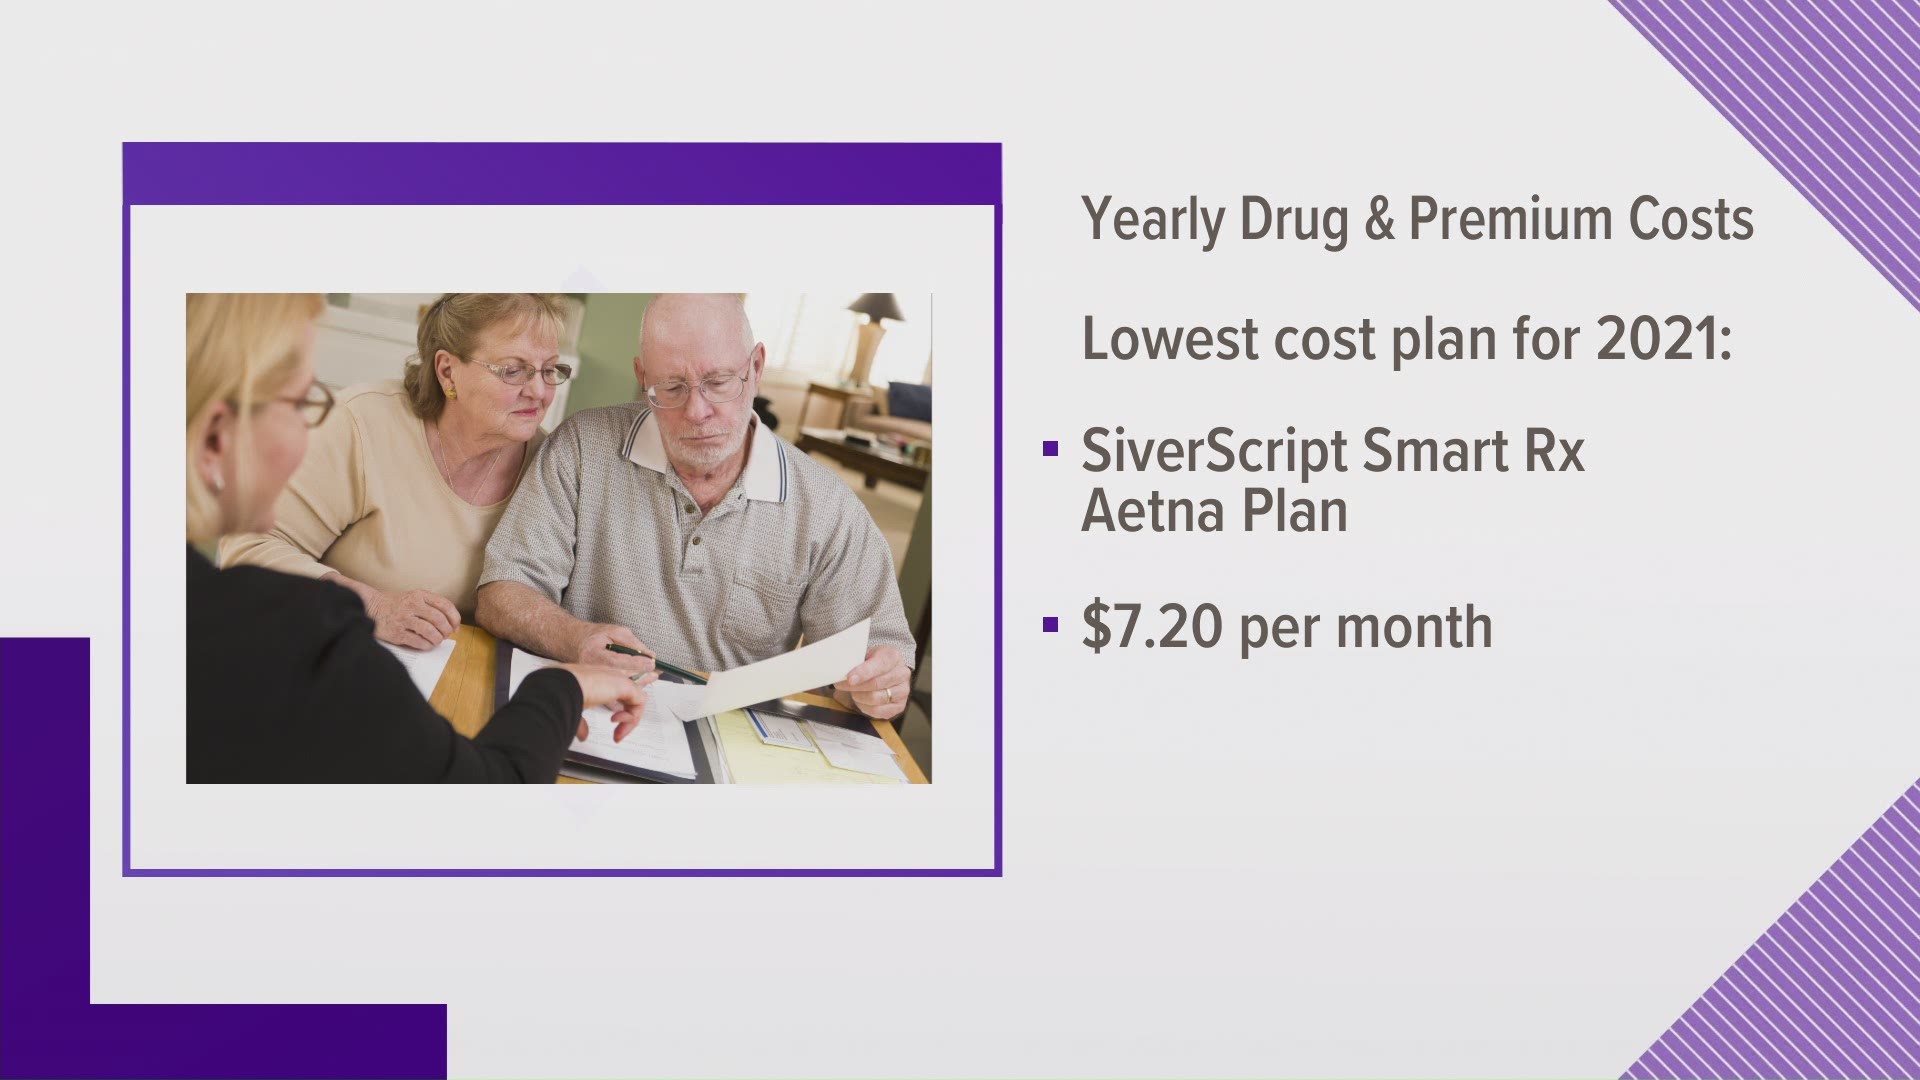 The SilverScript Smart Rx plan, for example, is $7,20 a month. Open enrollment is Oct. 15 to Dec. 7.